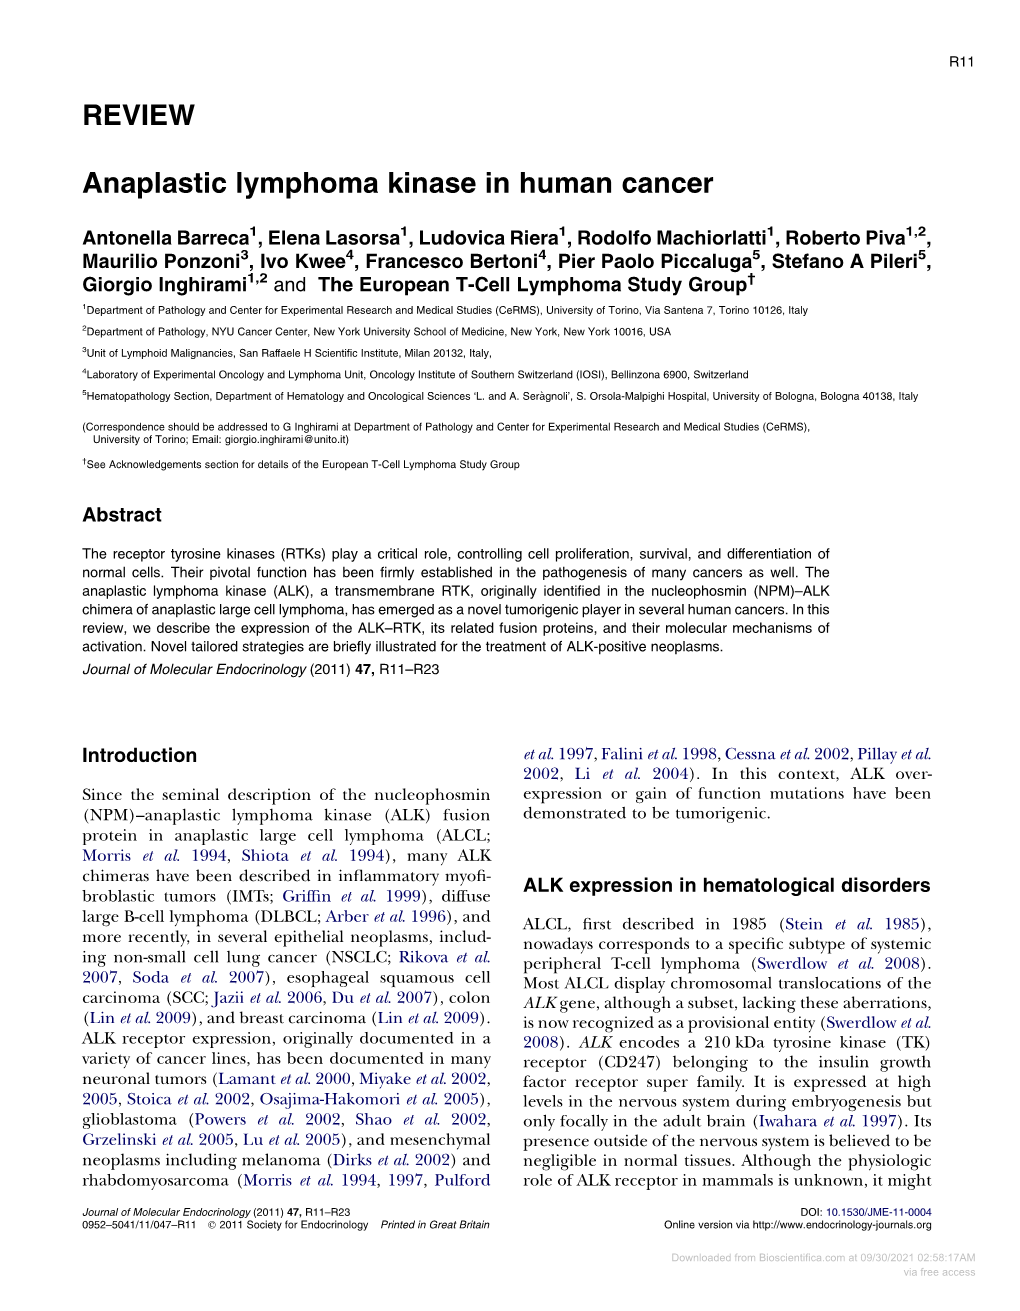 REVIEW Anaplastic Lymphoma Kinase in Human Cancer